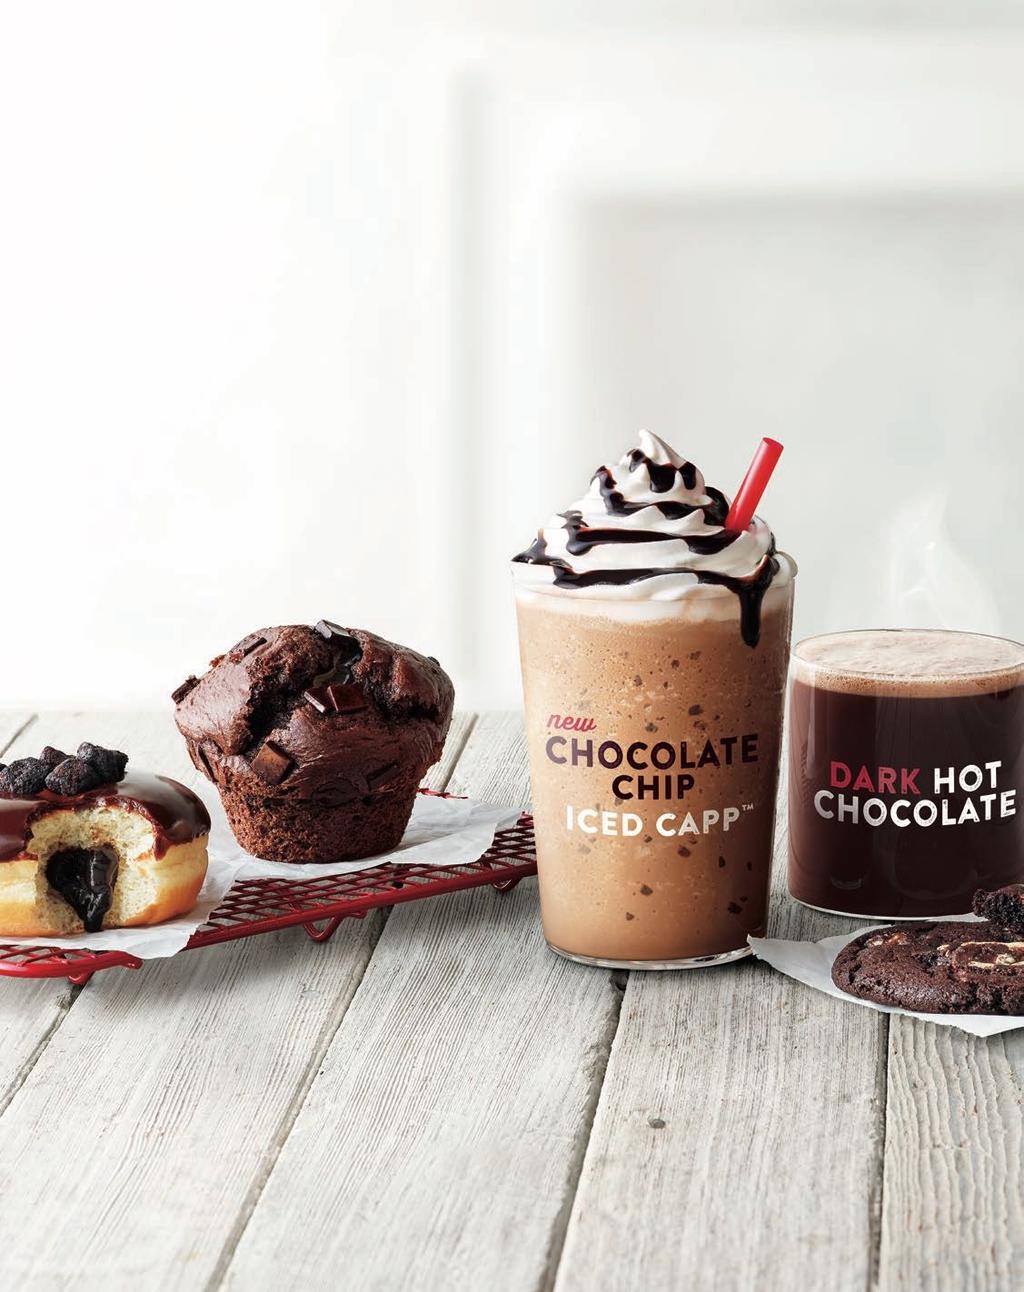 At Tim Hortons, we believe that you shouldn't have to compromise.